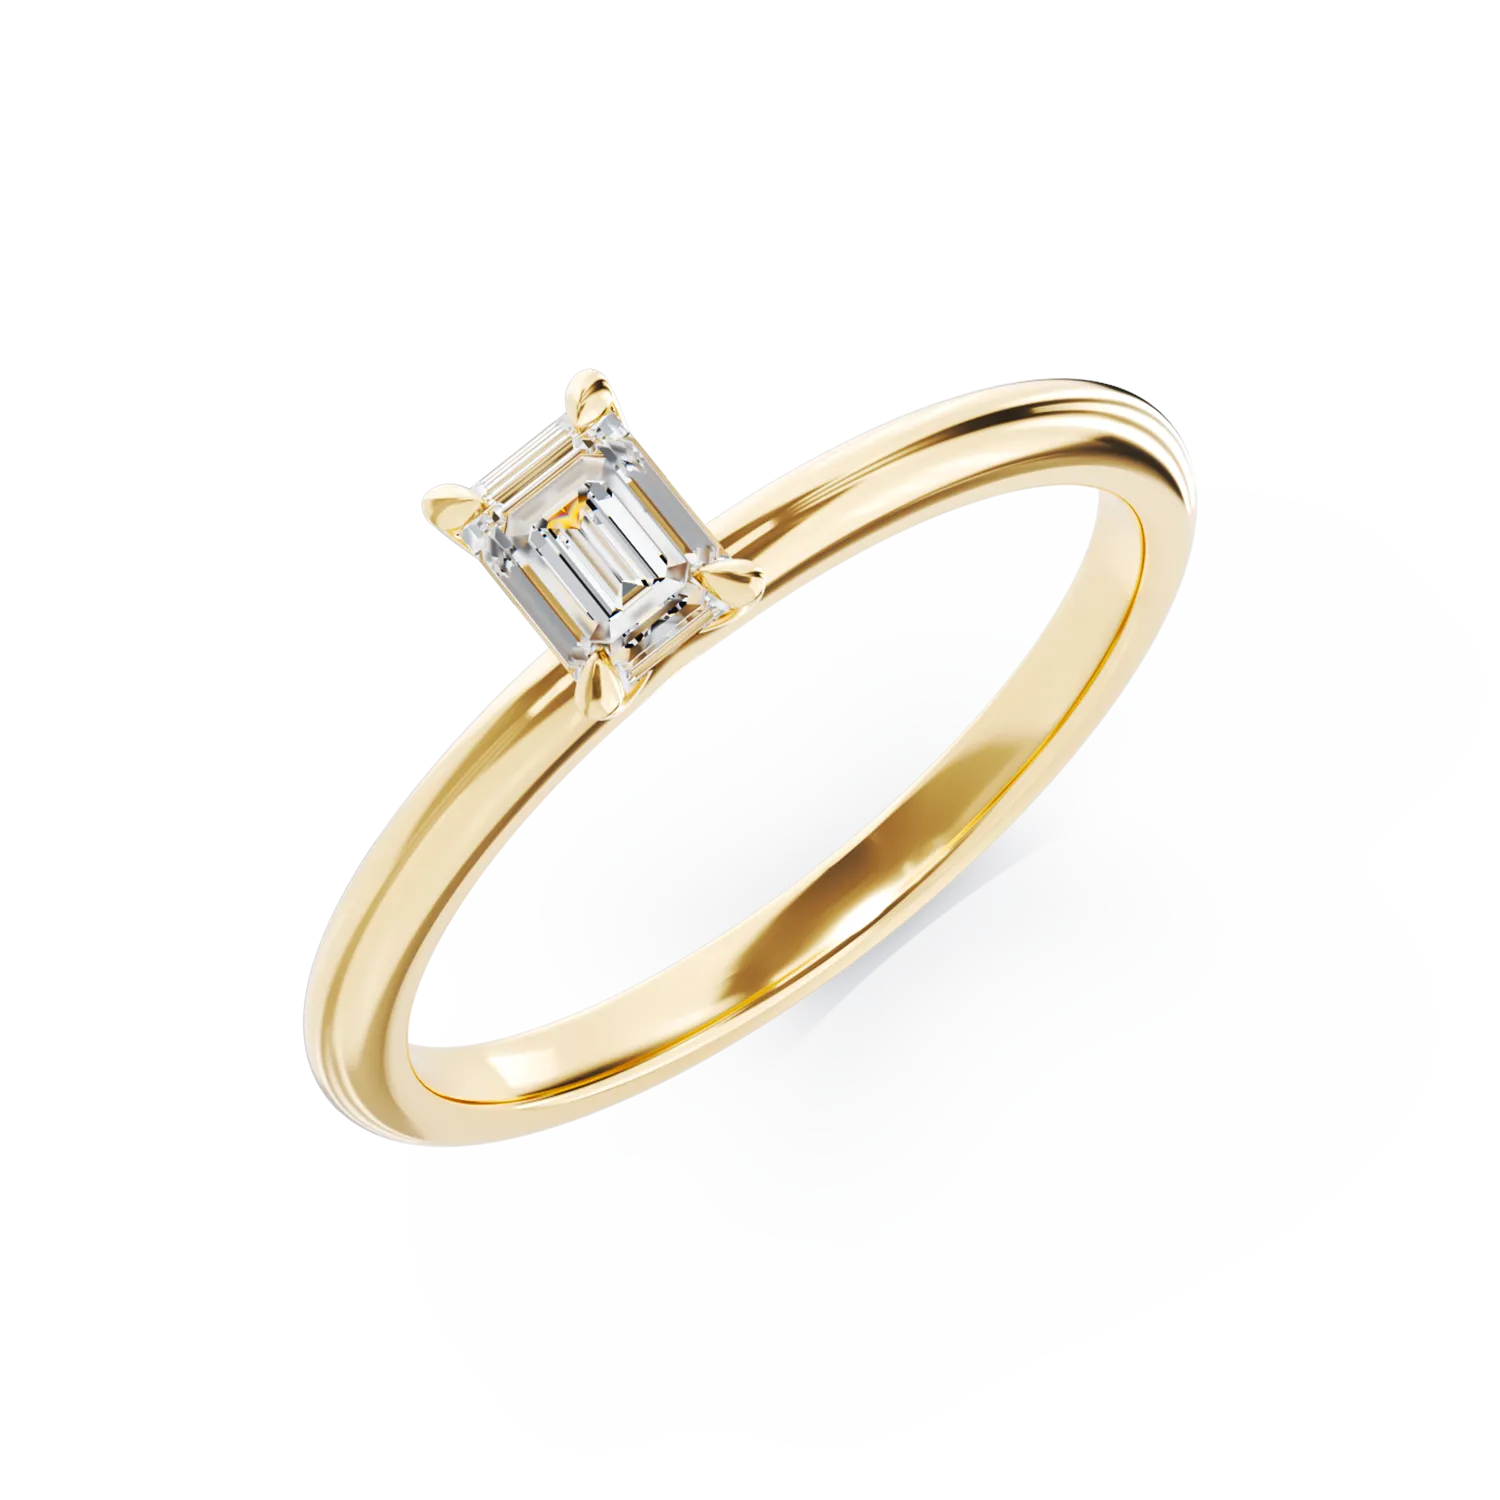 Yellow gold engagement ring with 0.3ct solitaire diamond